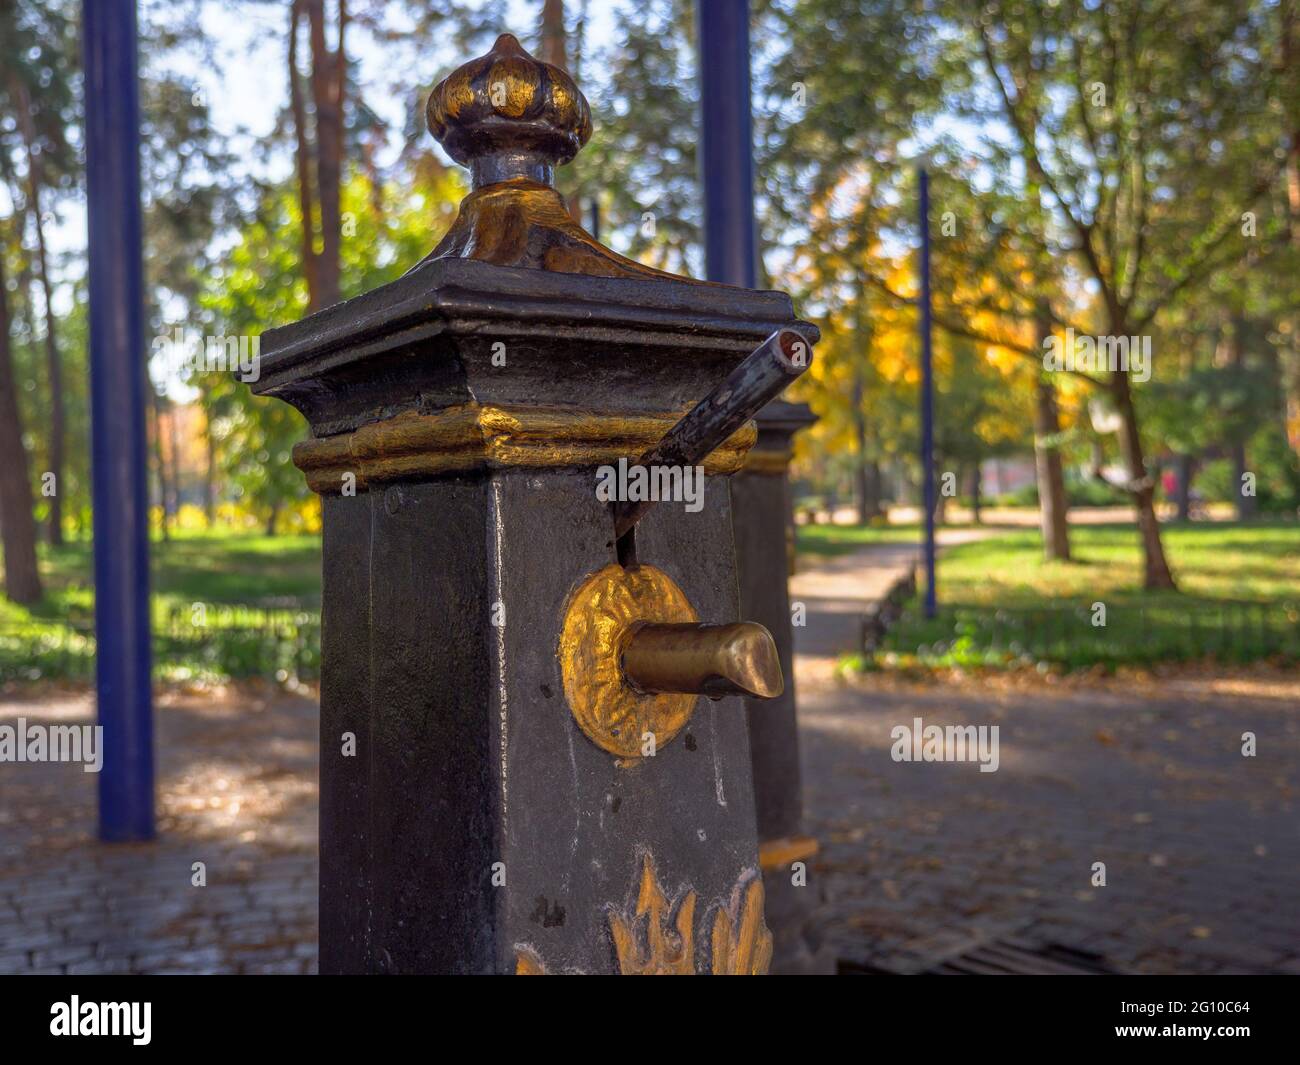 Old-fashioned public metal hand water pumps with golden decoration to draw up clean well water for people to drink and collect it in bottles. Stock Photo